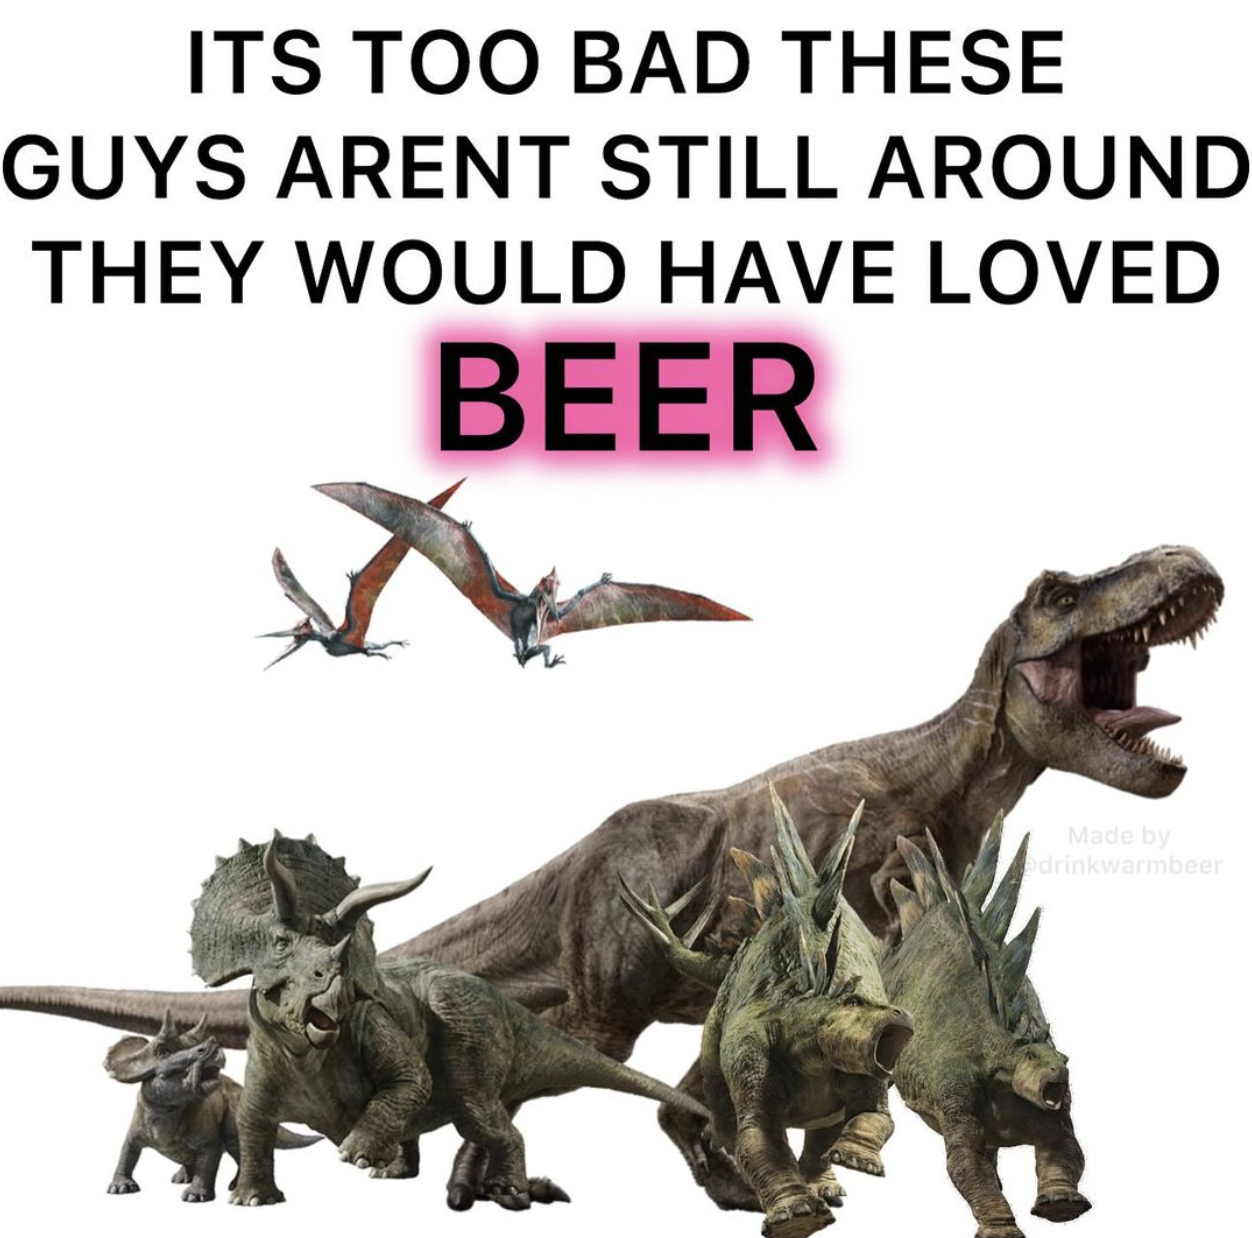 tyrannosaurus rex deviantart jurassic world - Its Too Bad These Guys Arent Still Around They Would Have Loved Beer Made by